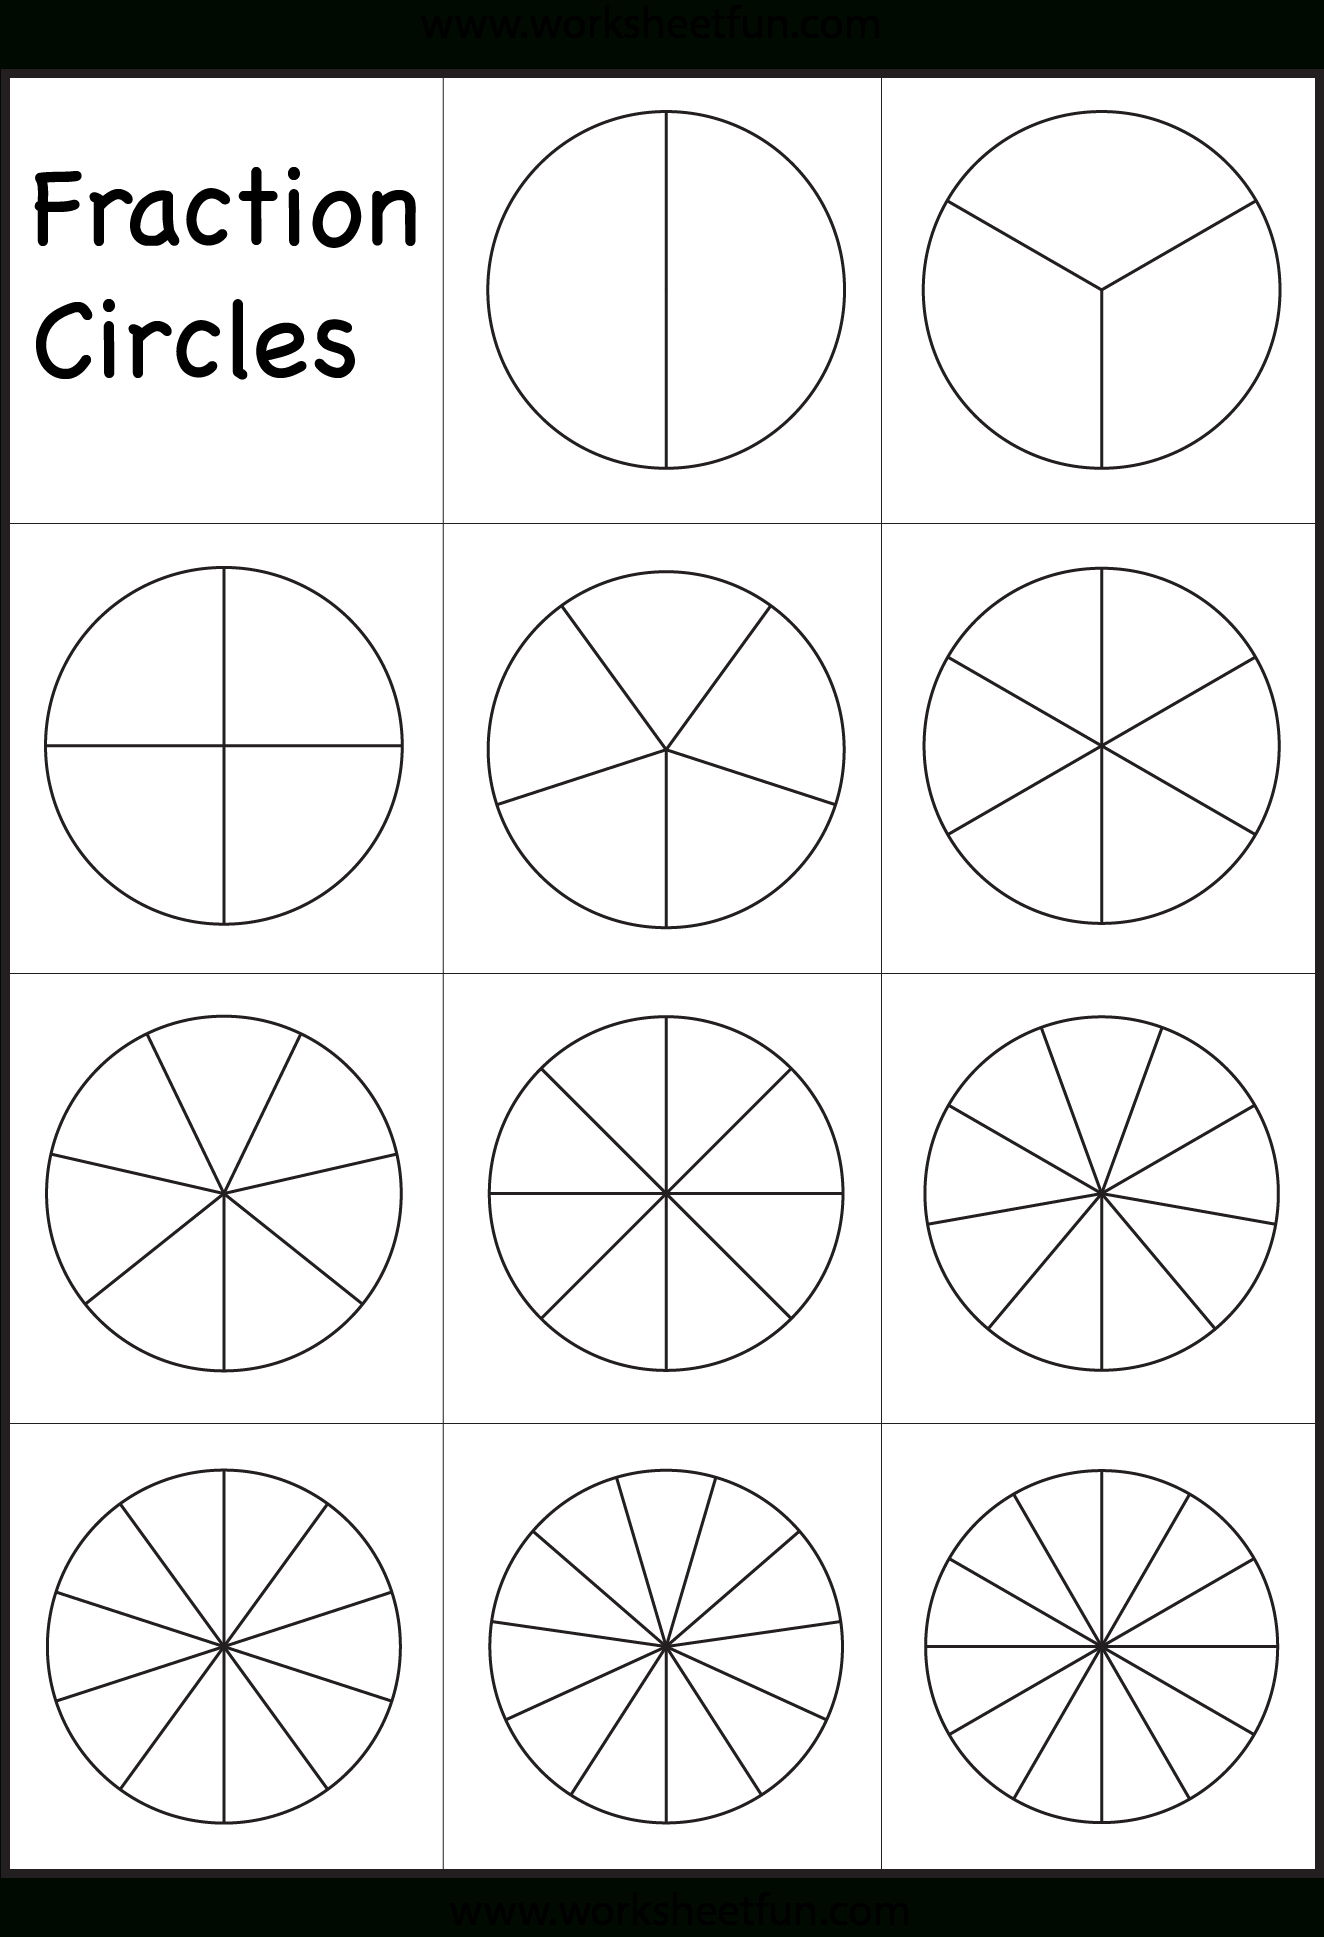 Fraction Circles Template – Printable Fraction Circles – 1 Worksheet - Free Printable Blank Fraction Circles